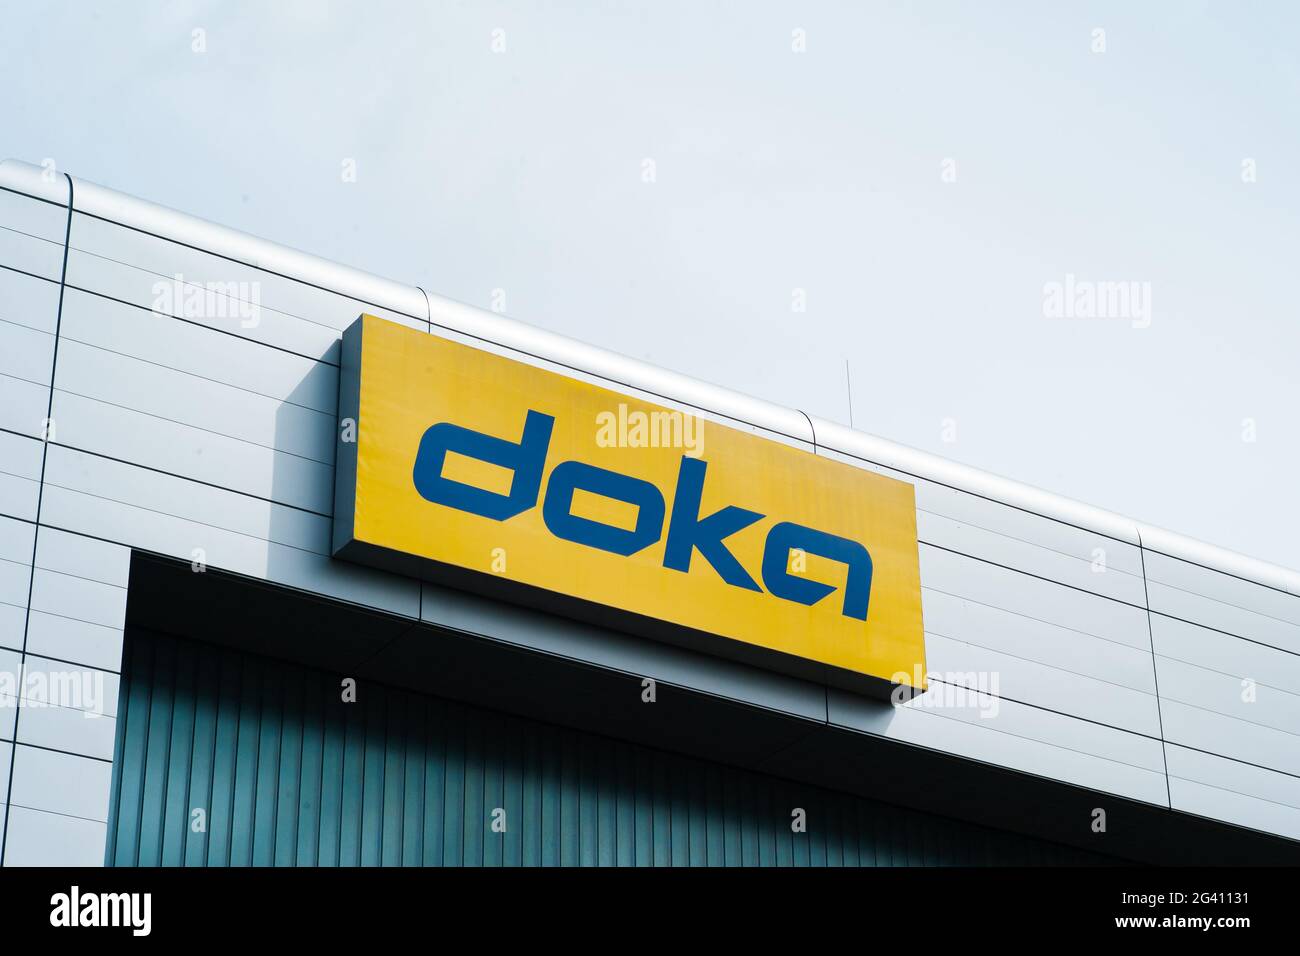 Amstetten, Austria - May 14 2021: Doka Gmbh Formwork and Scaffolding Production Headquarters or HQ with Brand Logo, part of the Umdasch Group. Stock Photo